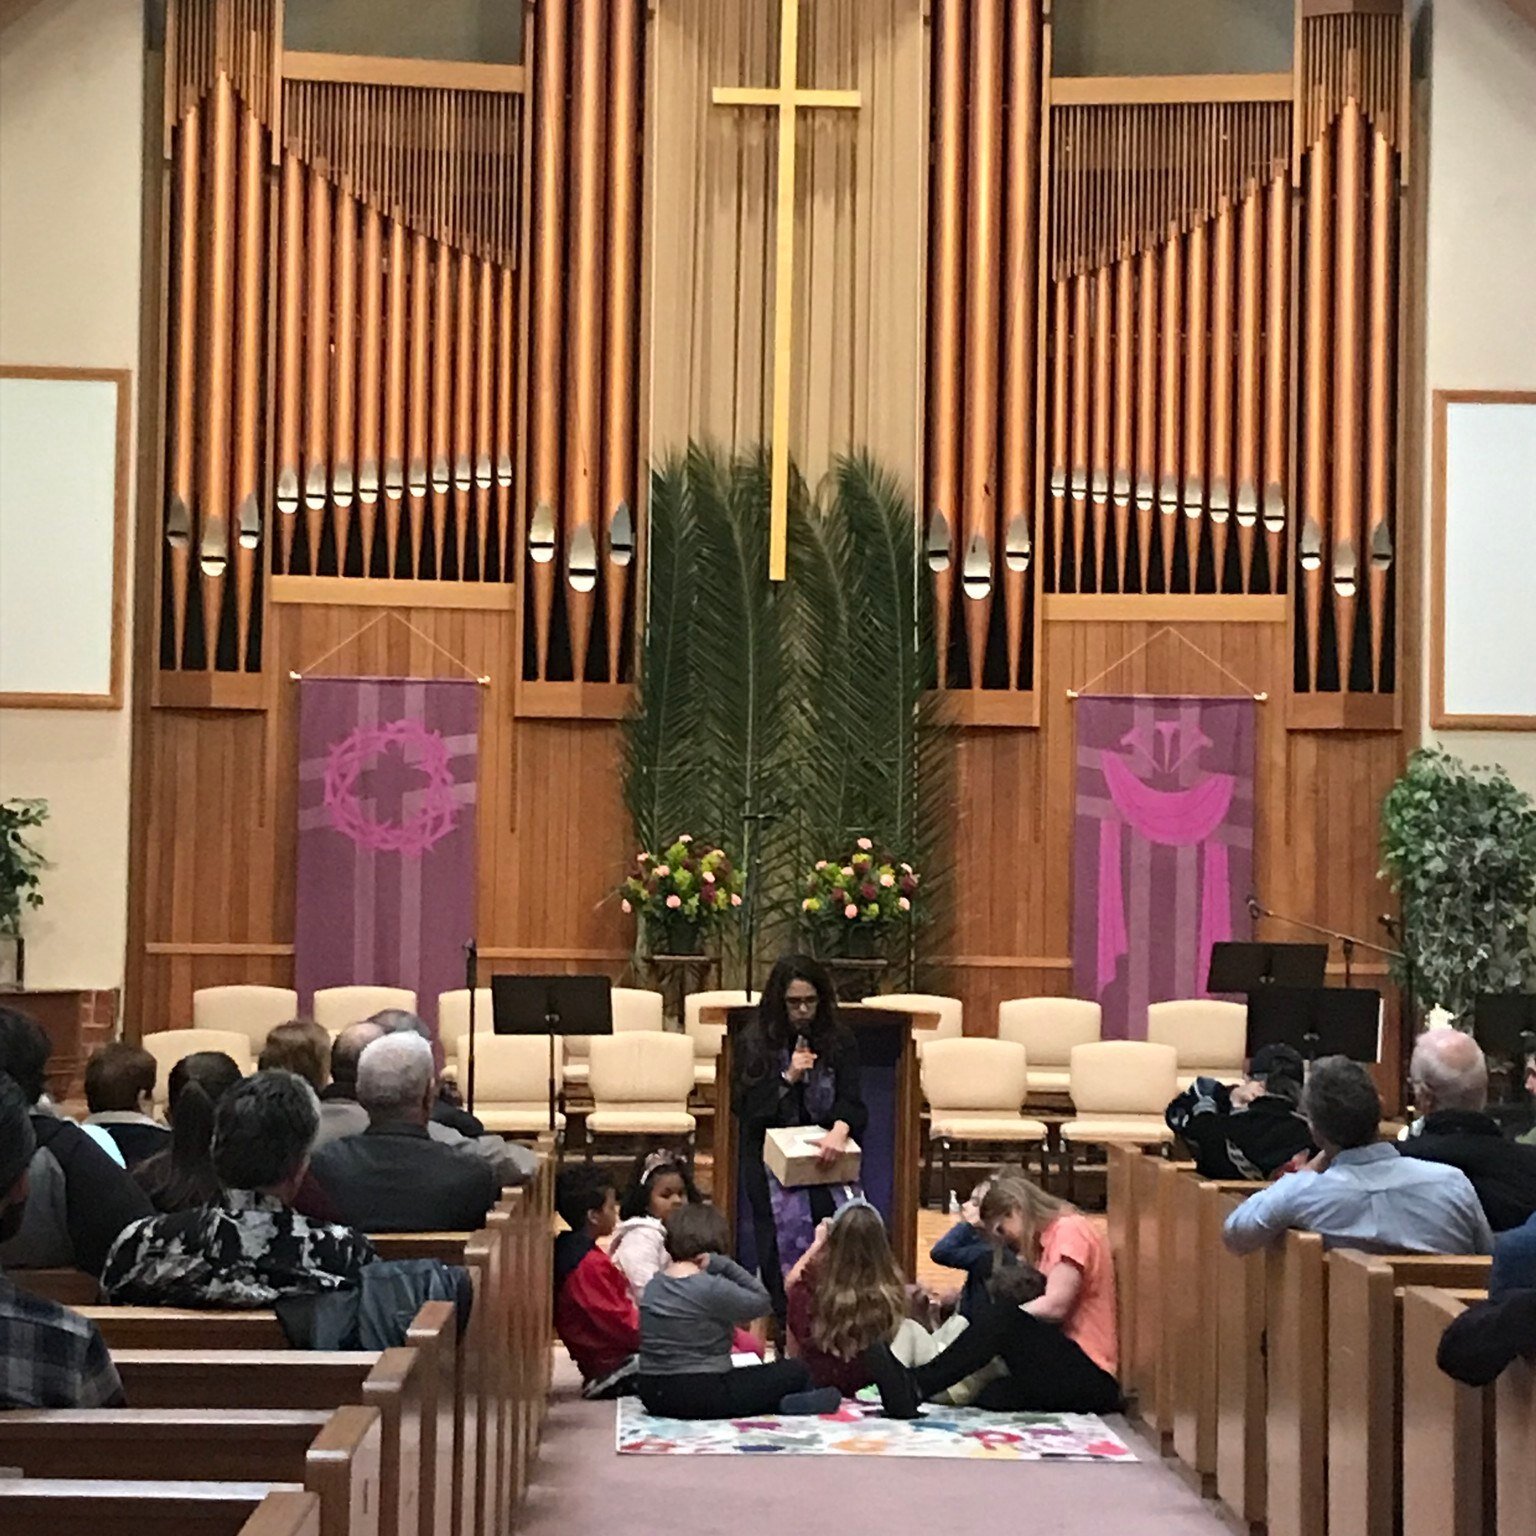 We hope you were able to join us (whether in person or online) for one or all of our Holy Week services. We are grateful for those of you who shared your time and gifts to help facilitate those spaces for us! These photos are from Palm Sunday through